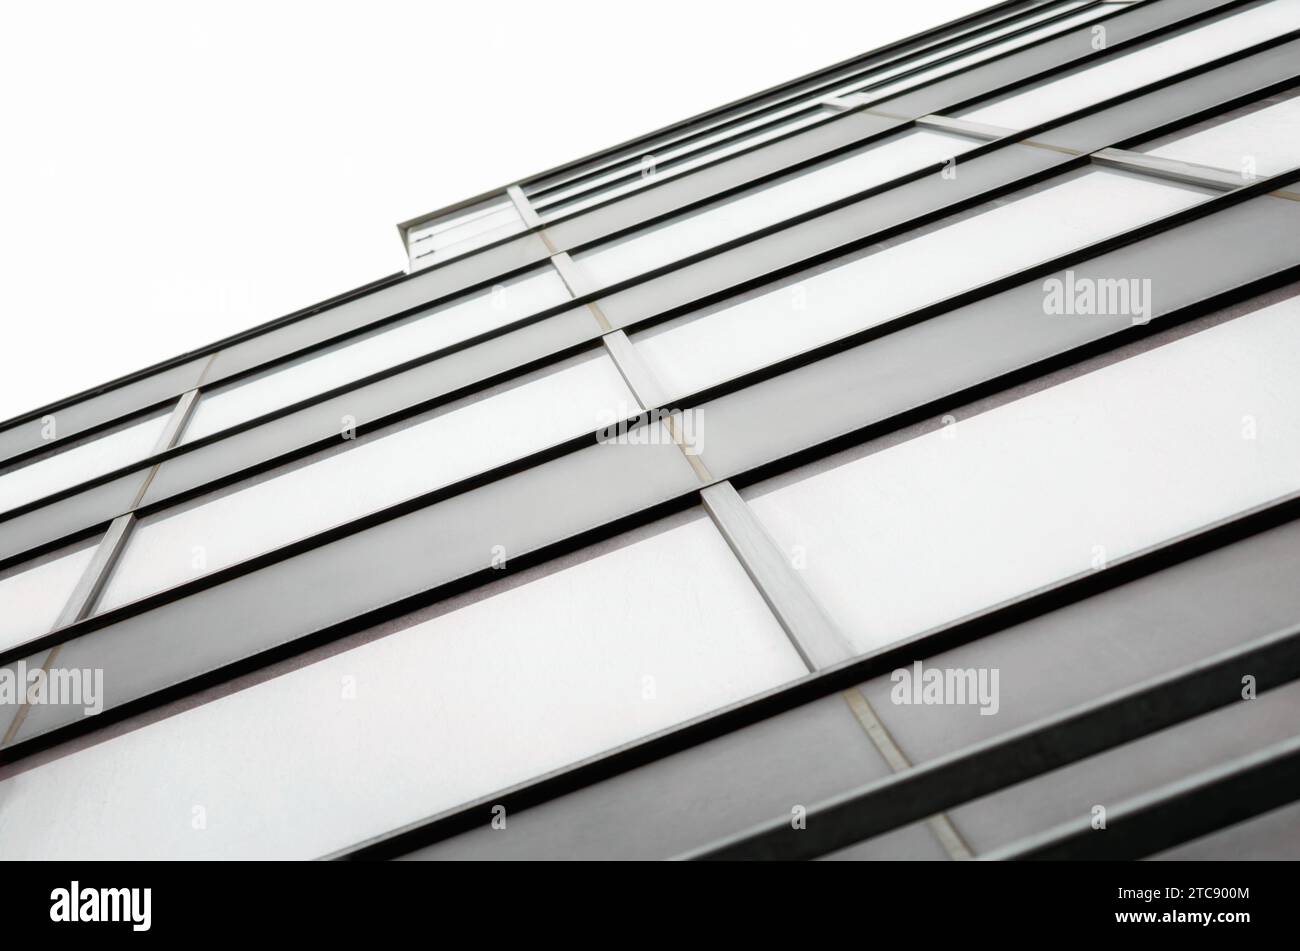 Fragment of the wall and windows of a modern tall office building without people abstract architectural monochromatic background Stock Photo